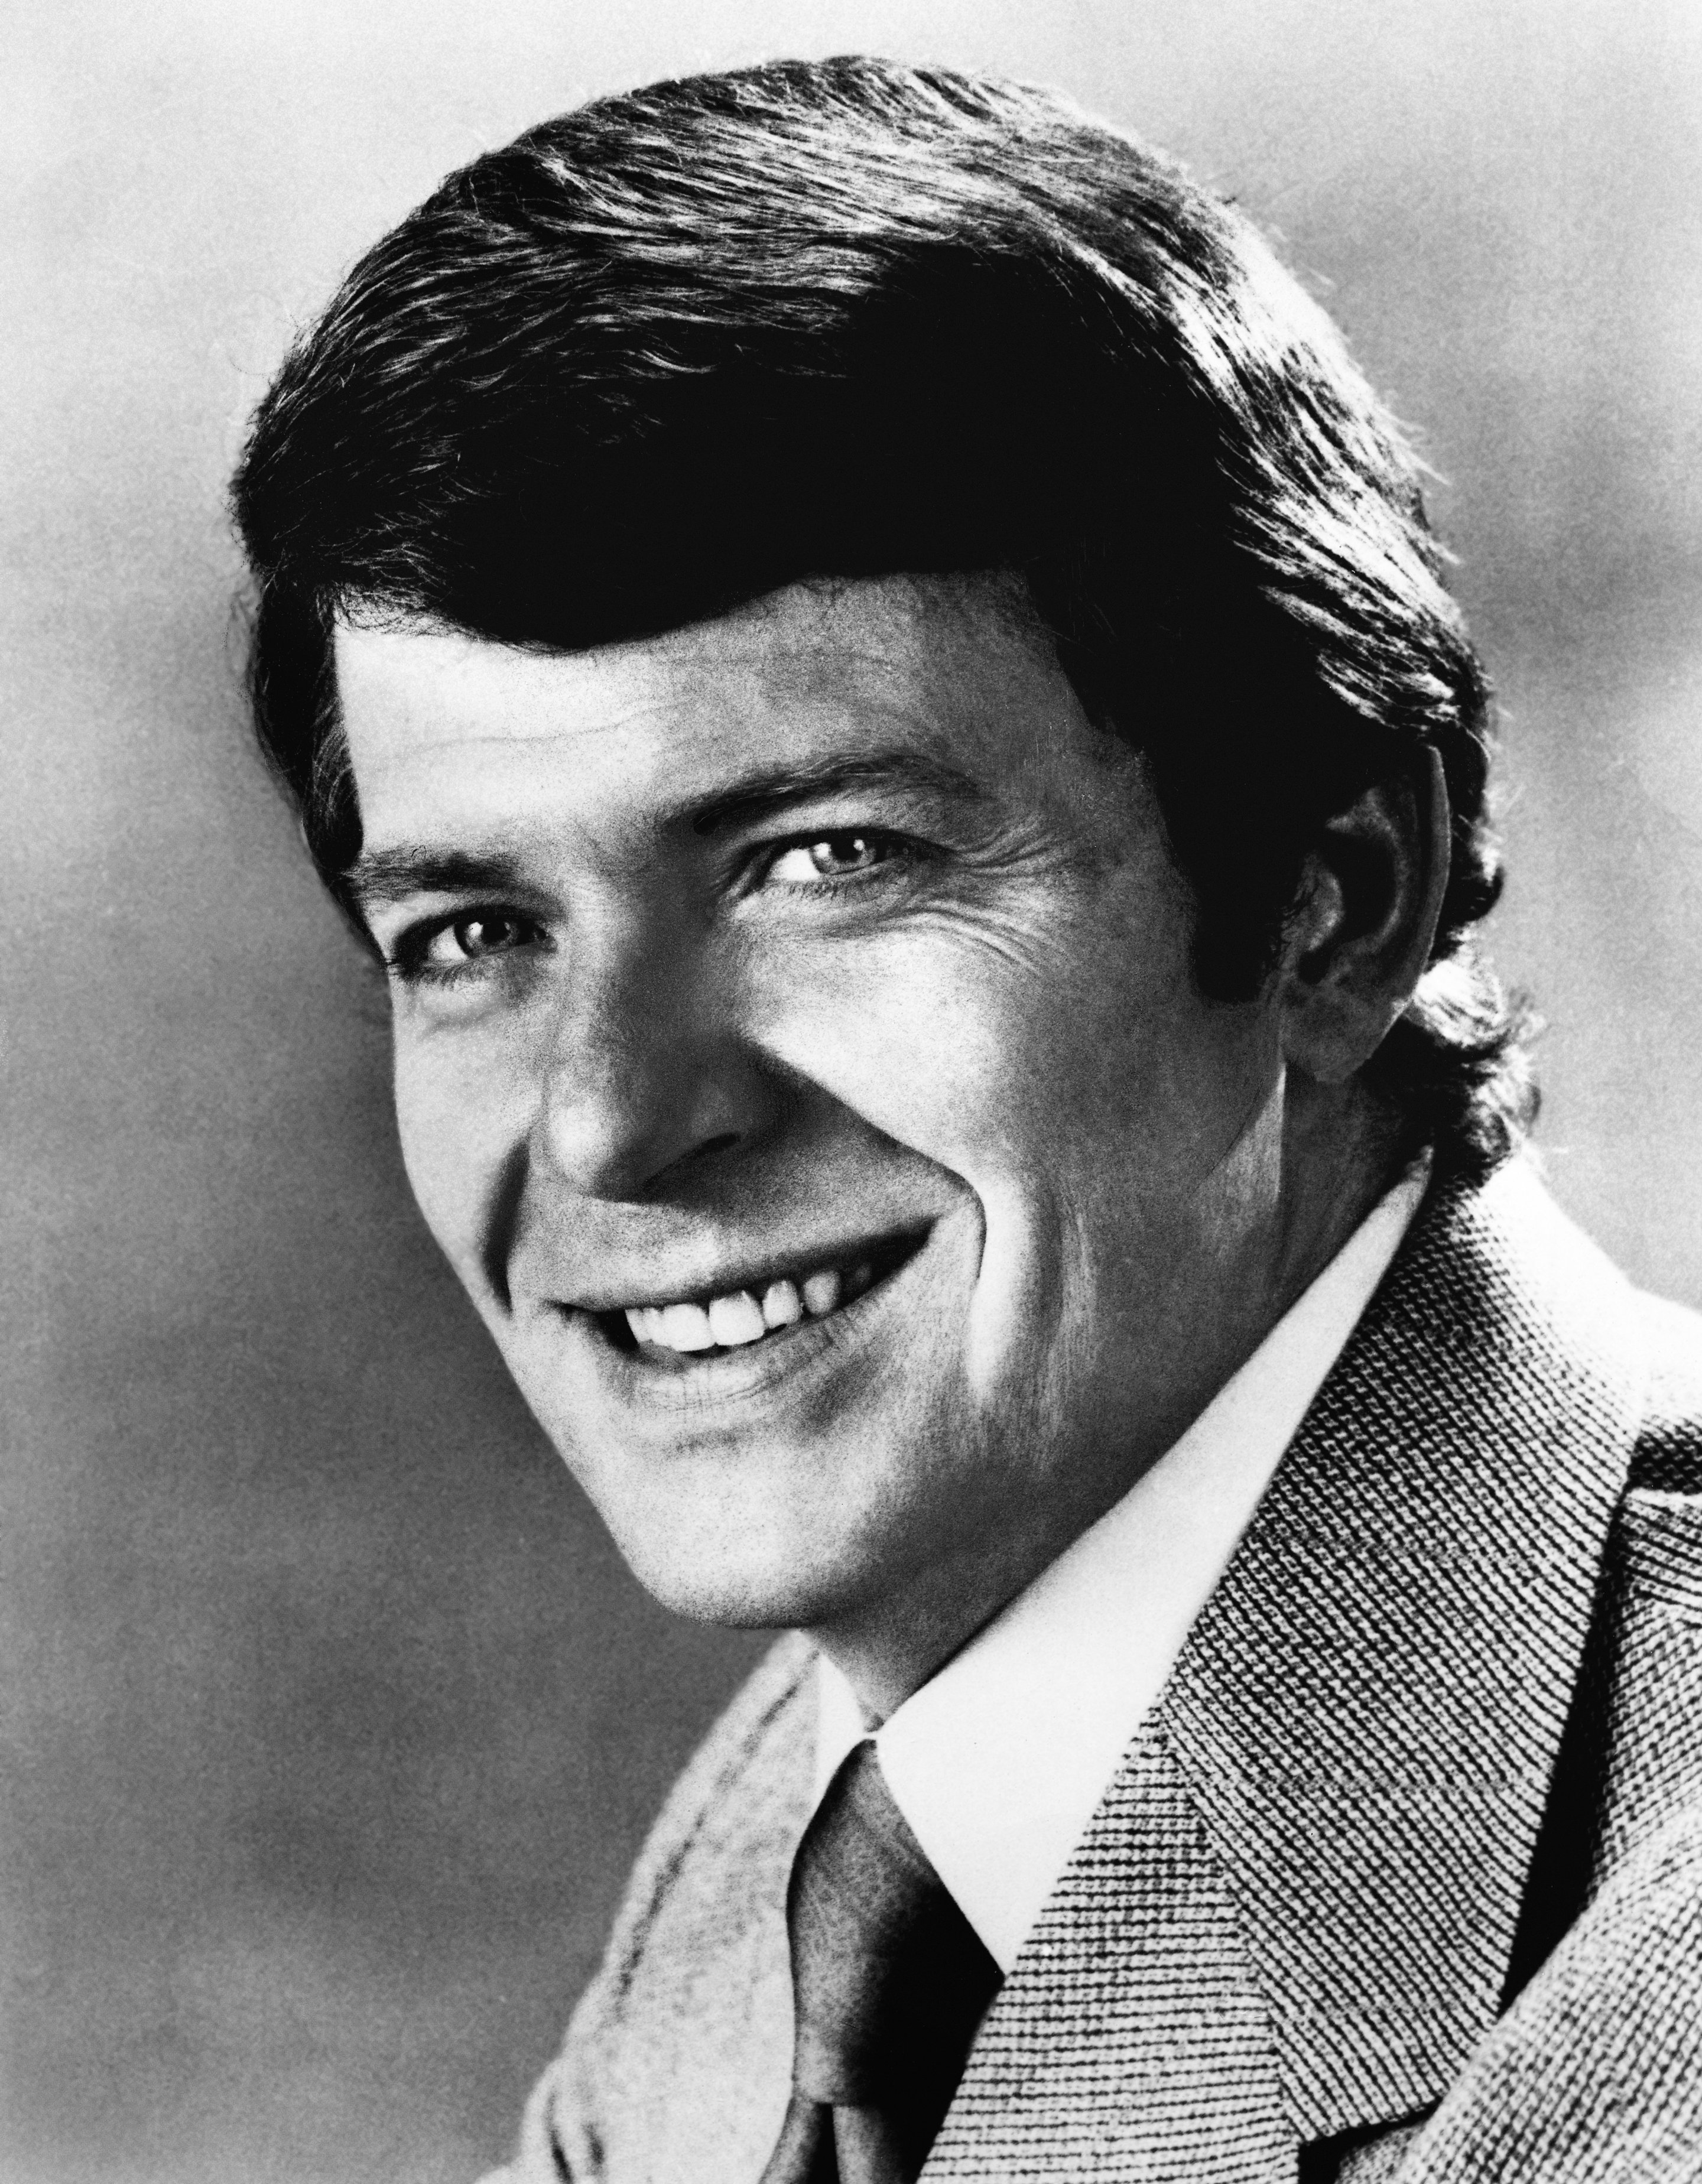 A portrait of Robert Reed from "The Brady Bunch" | Source: Getty Images